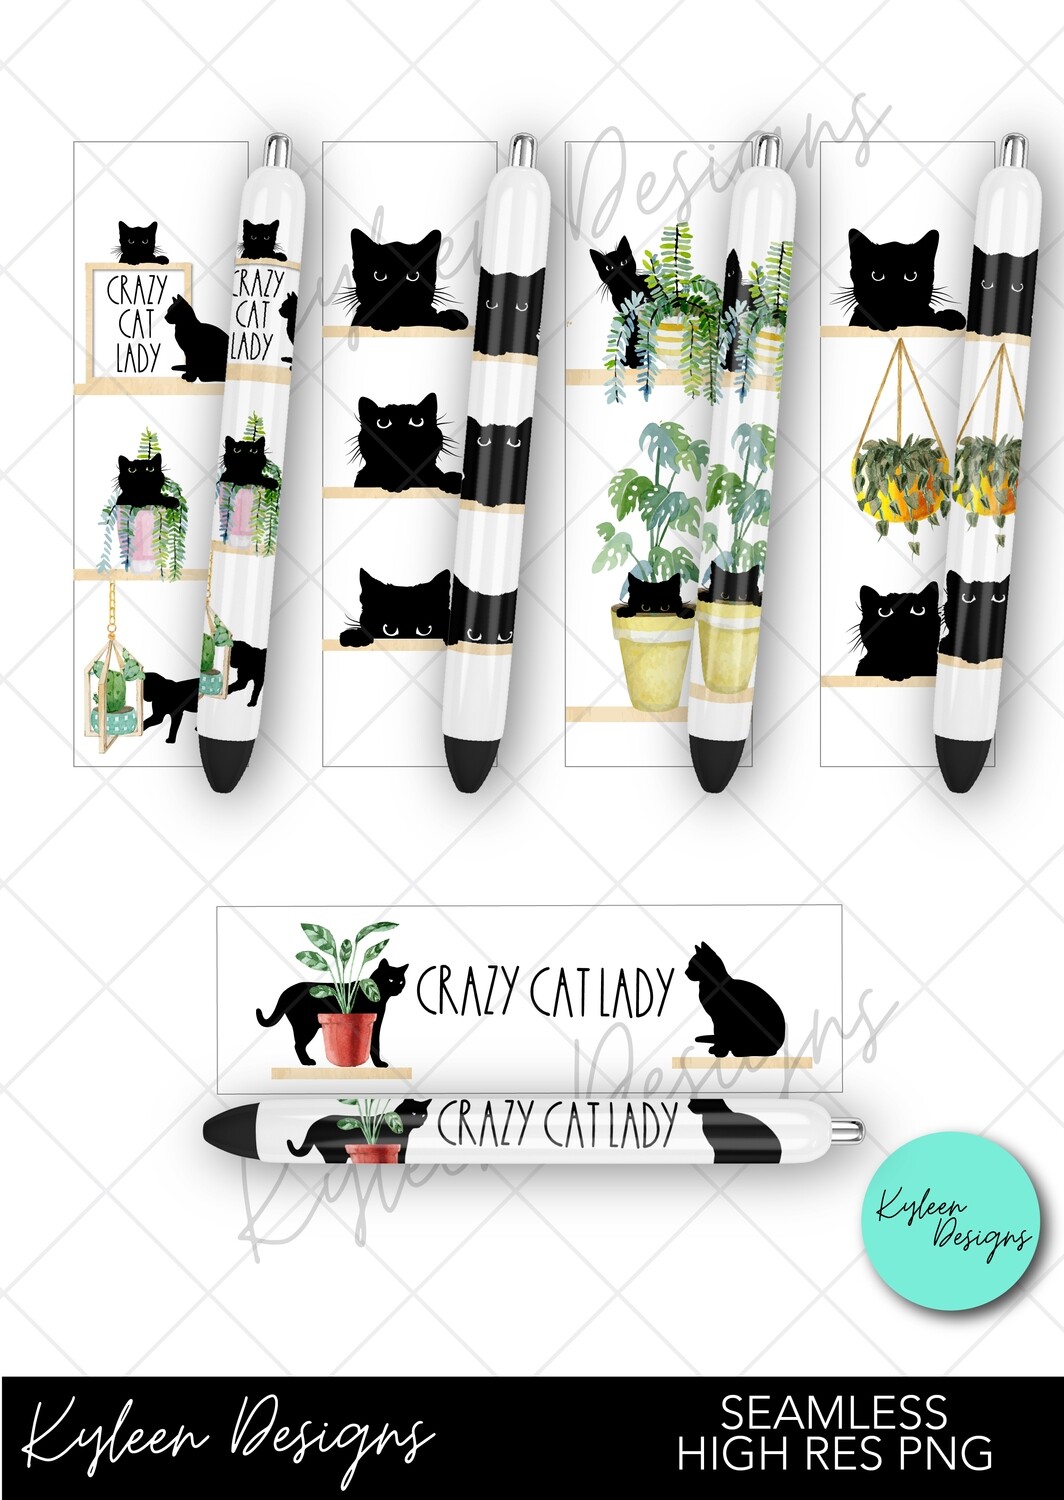 Seamless Crazy Cat Lady Pen wrappers™  for waterslide High Res PNG file